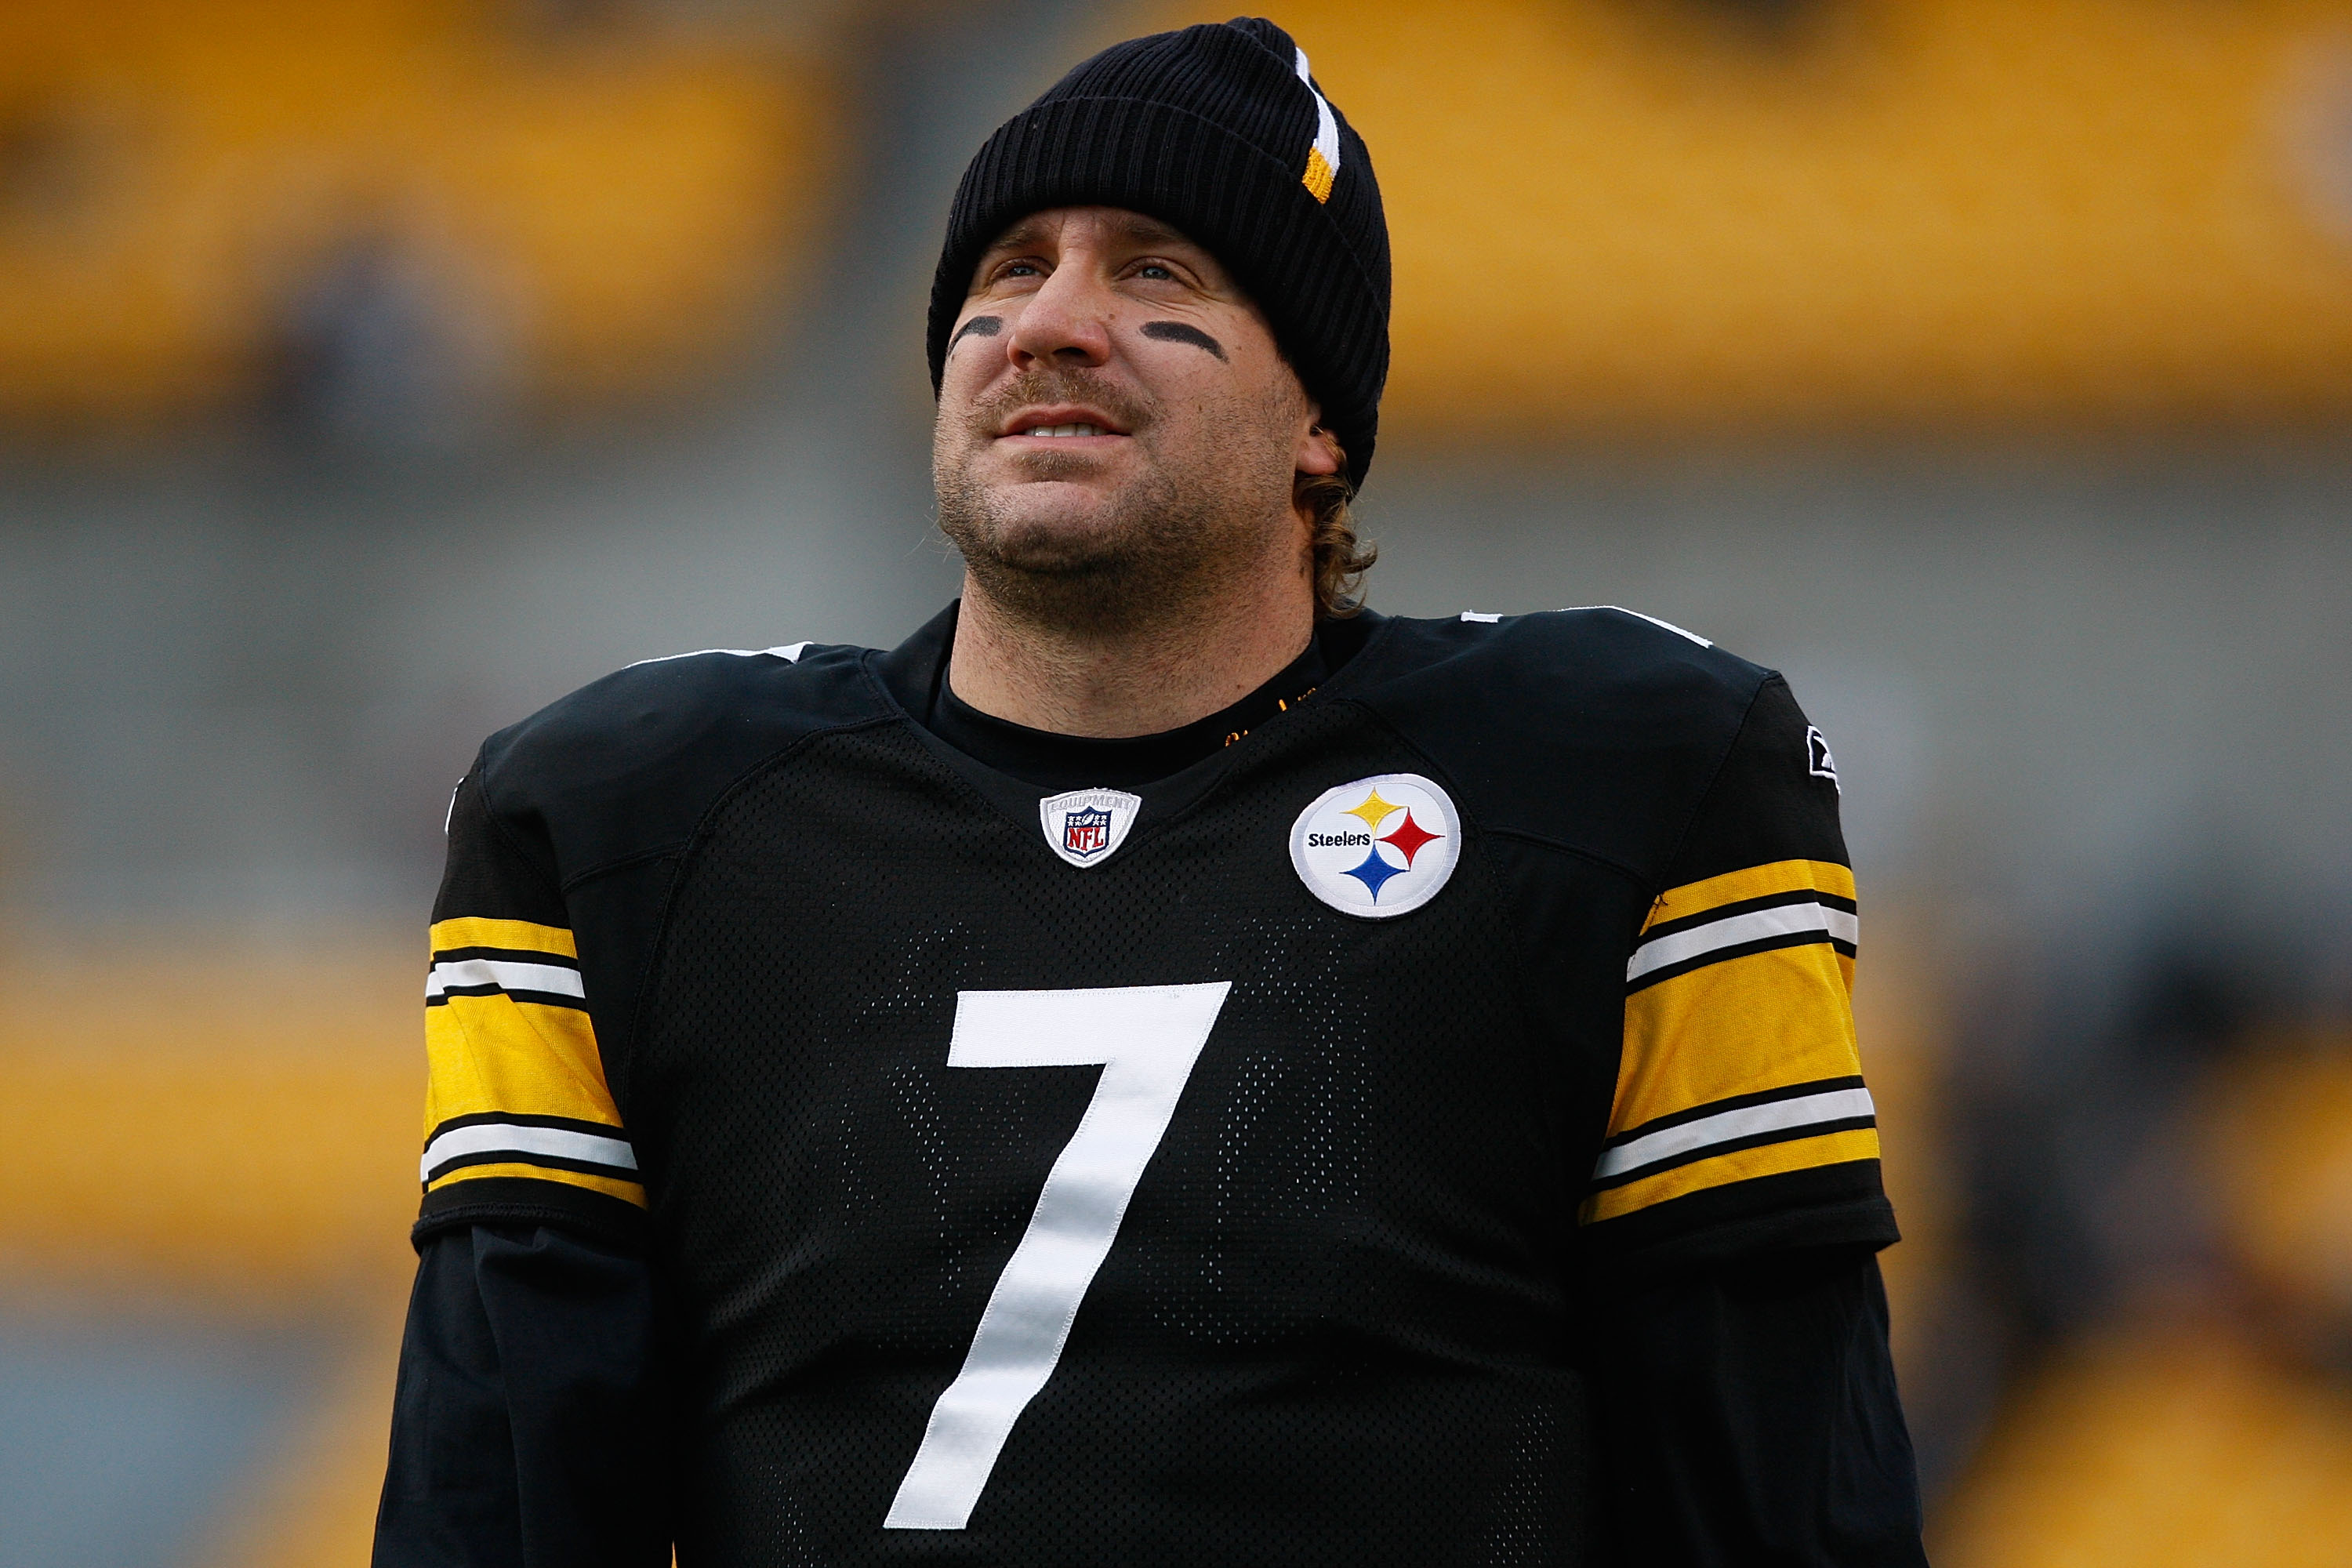 Revisiting Ben Roethlisberger’s Sexual Assault Allegations in the #MeToo Era